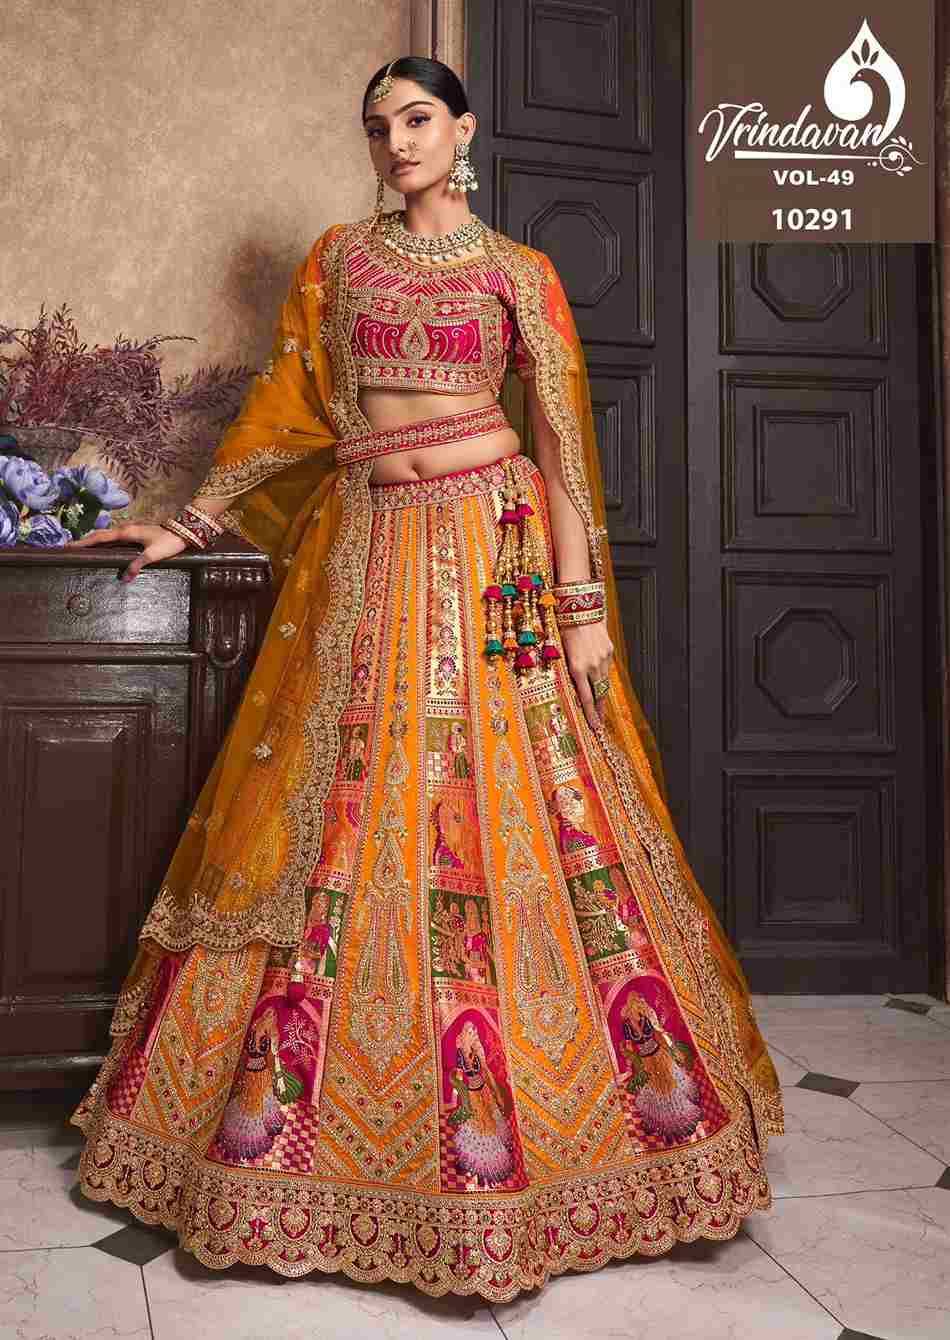 Vrindavan Vol-49 By Vrindavan 10290 To 10295 Series Designer Beautiful Wedding Collection Occasional Wear & Party Wear Fancy Lehengas At Wholesale Price